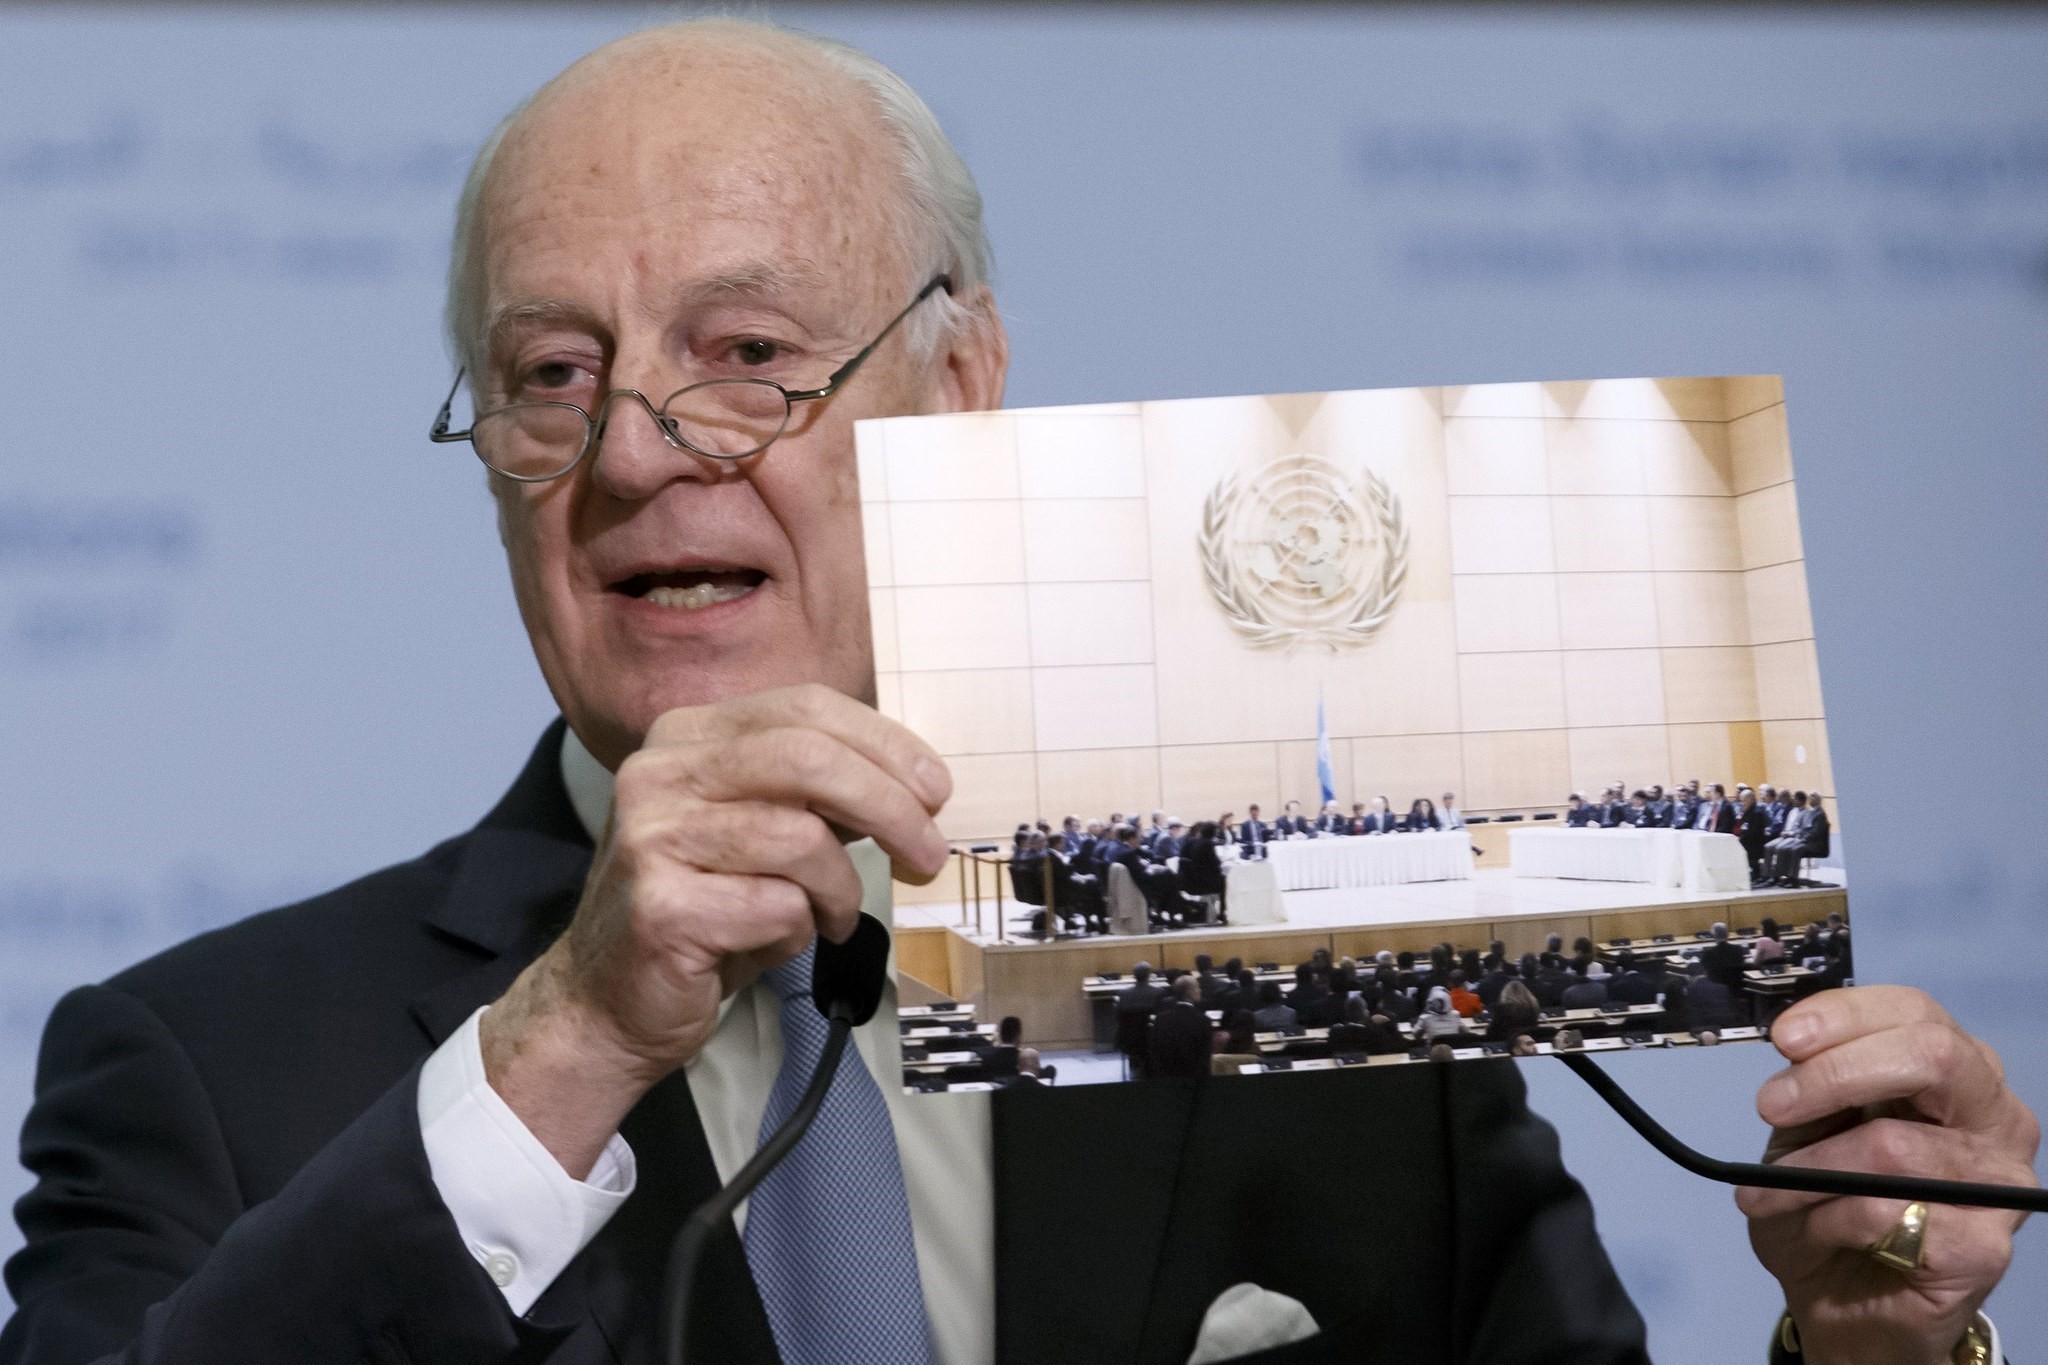 UN Special Envoy for Syria Staffan de Mistura informs the media during a press conference after closing the round of the Intra Syria talks. (EPA Photo)